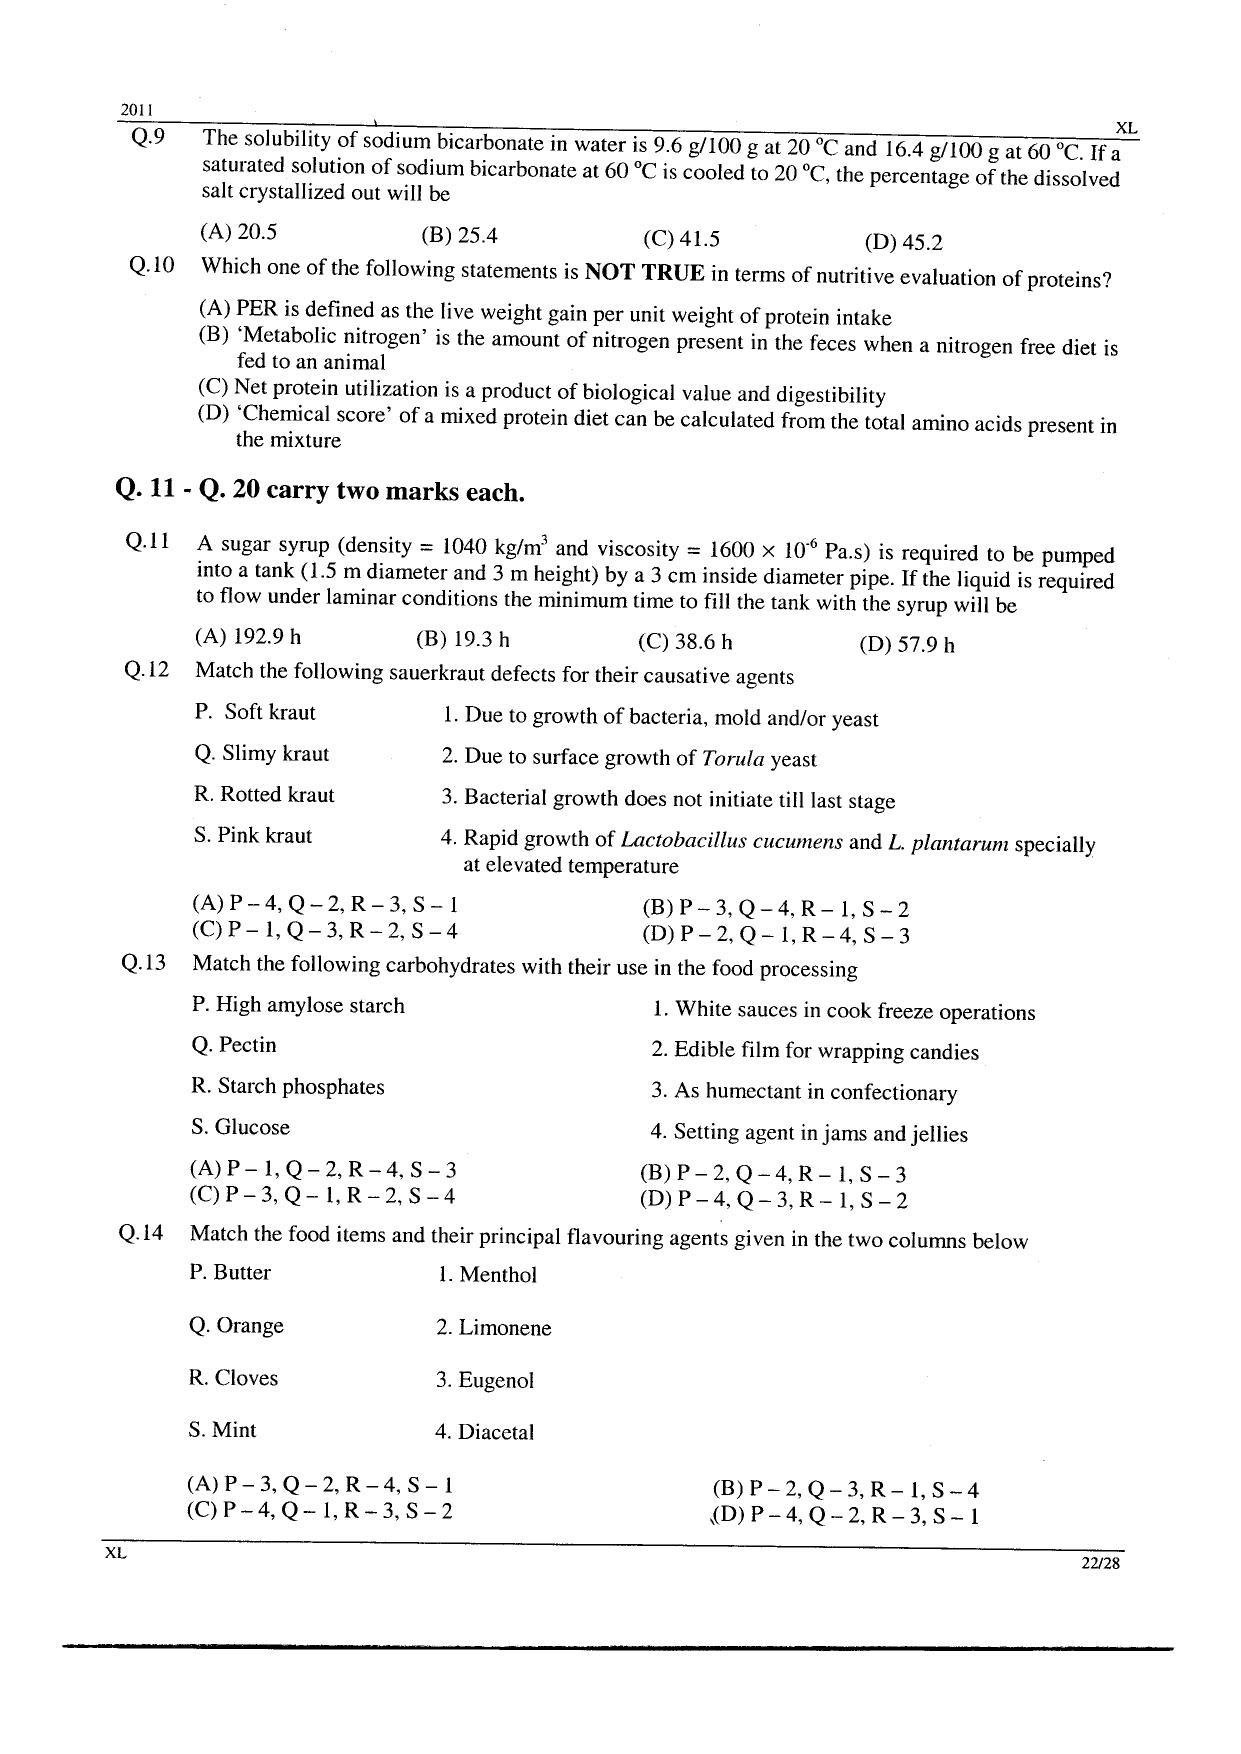 GATE 2011 Life Sciences (XL) Question Paper with Answer Key - Page 22